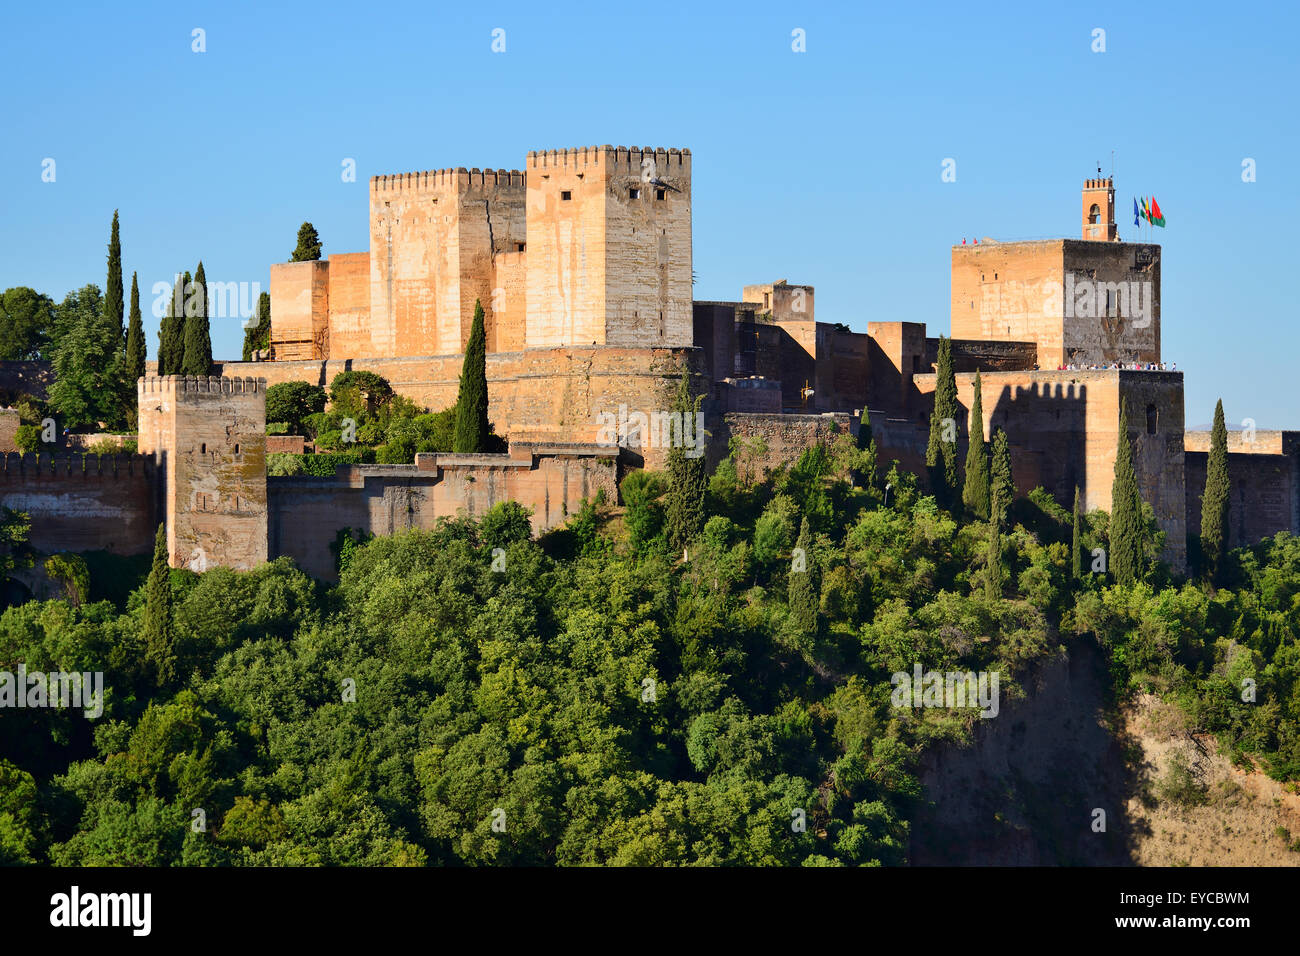 View of Alcazaba towers within the Alhambra Palace complex in Granada, Andalusia, Spain Stock Photo